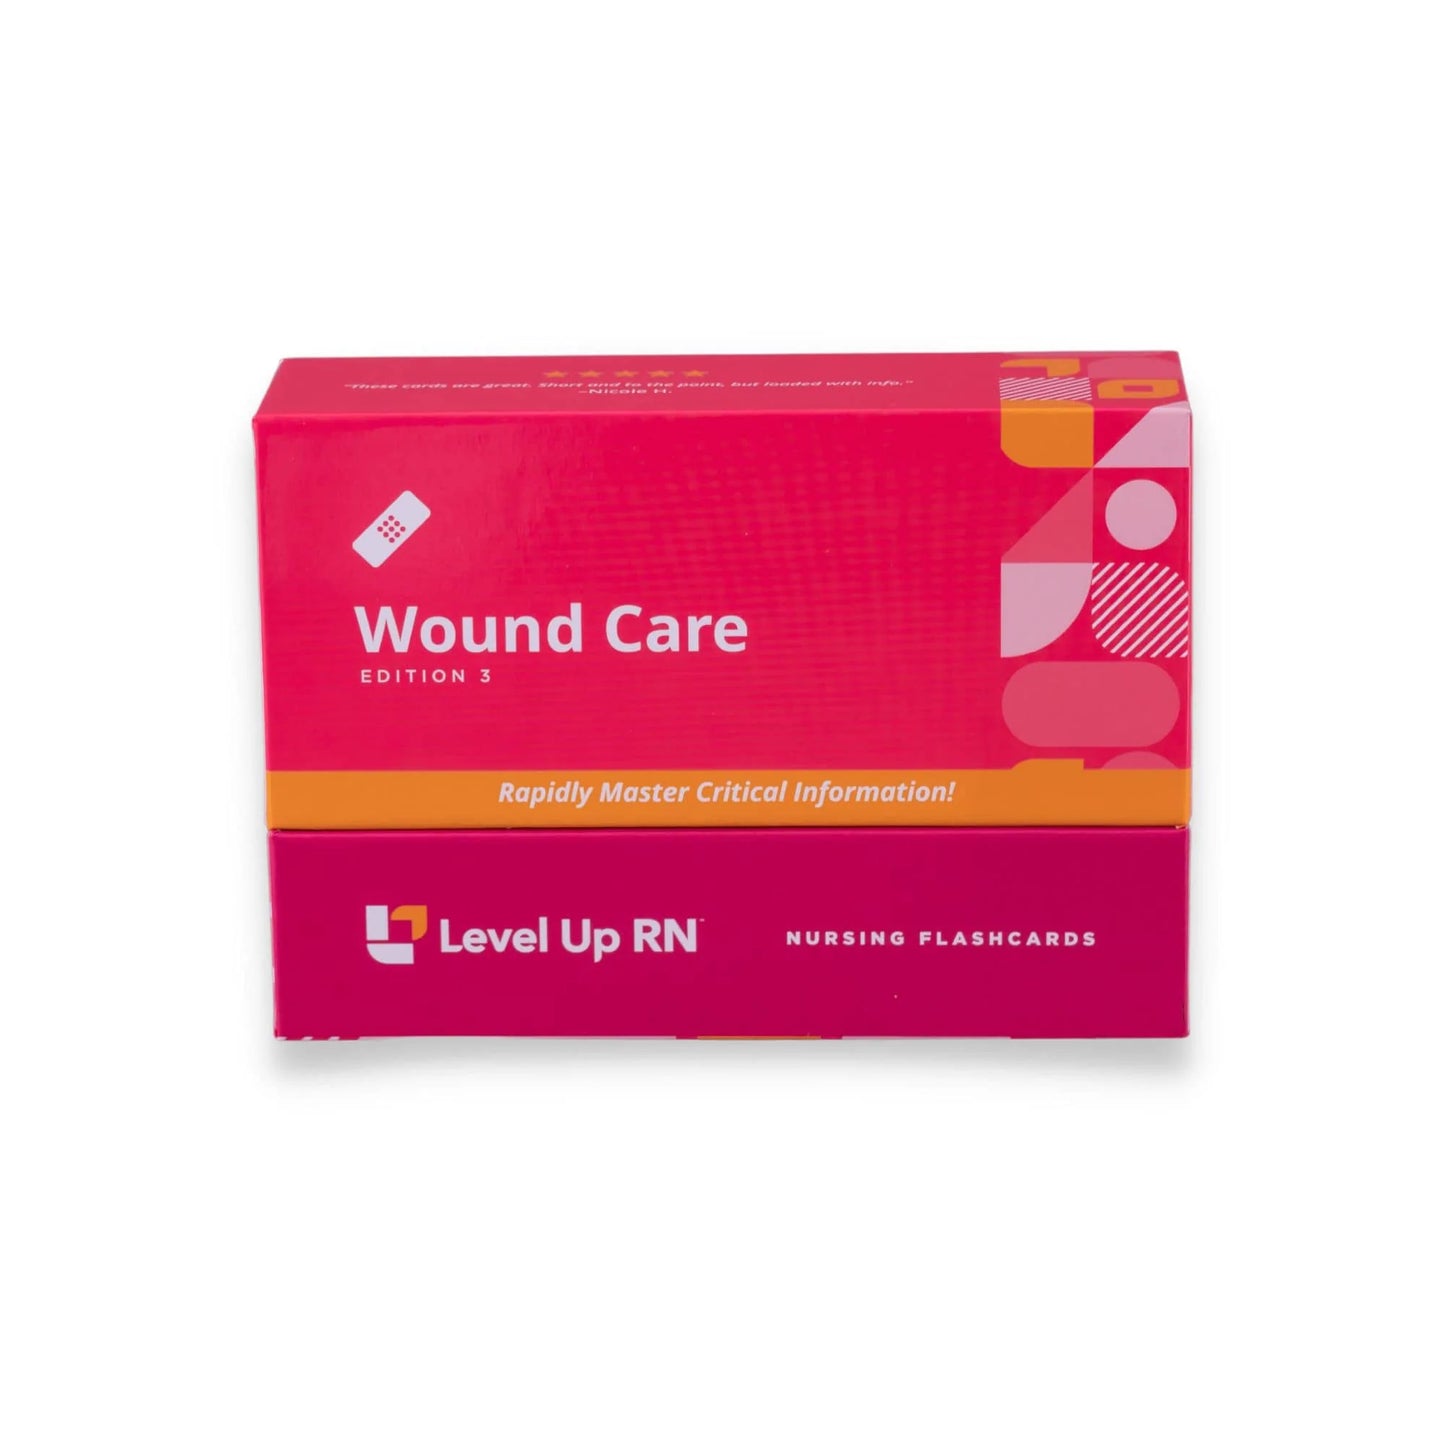 wound care included in The Comprehensive Nursing Collection